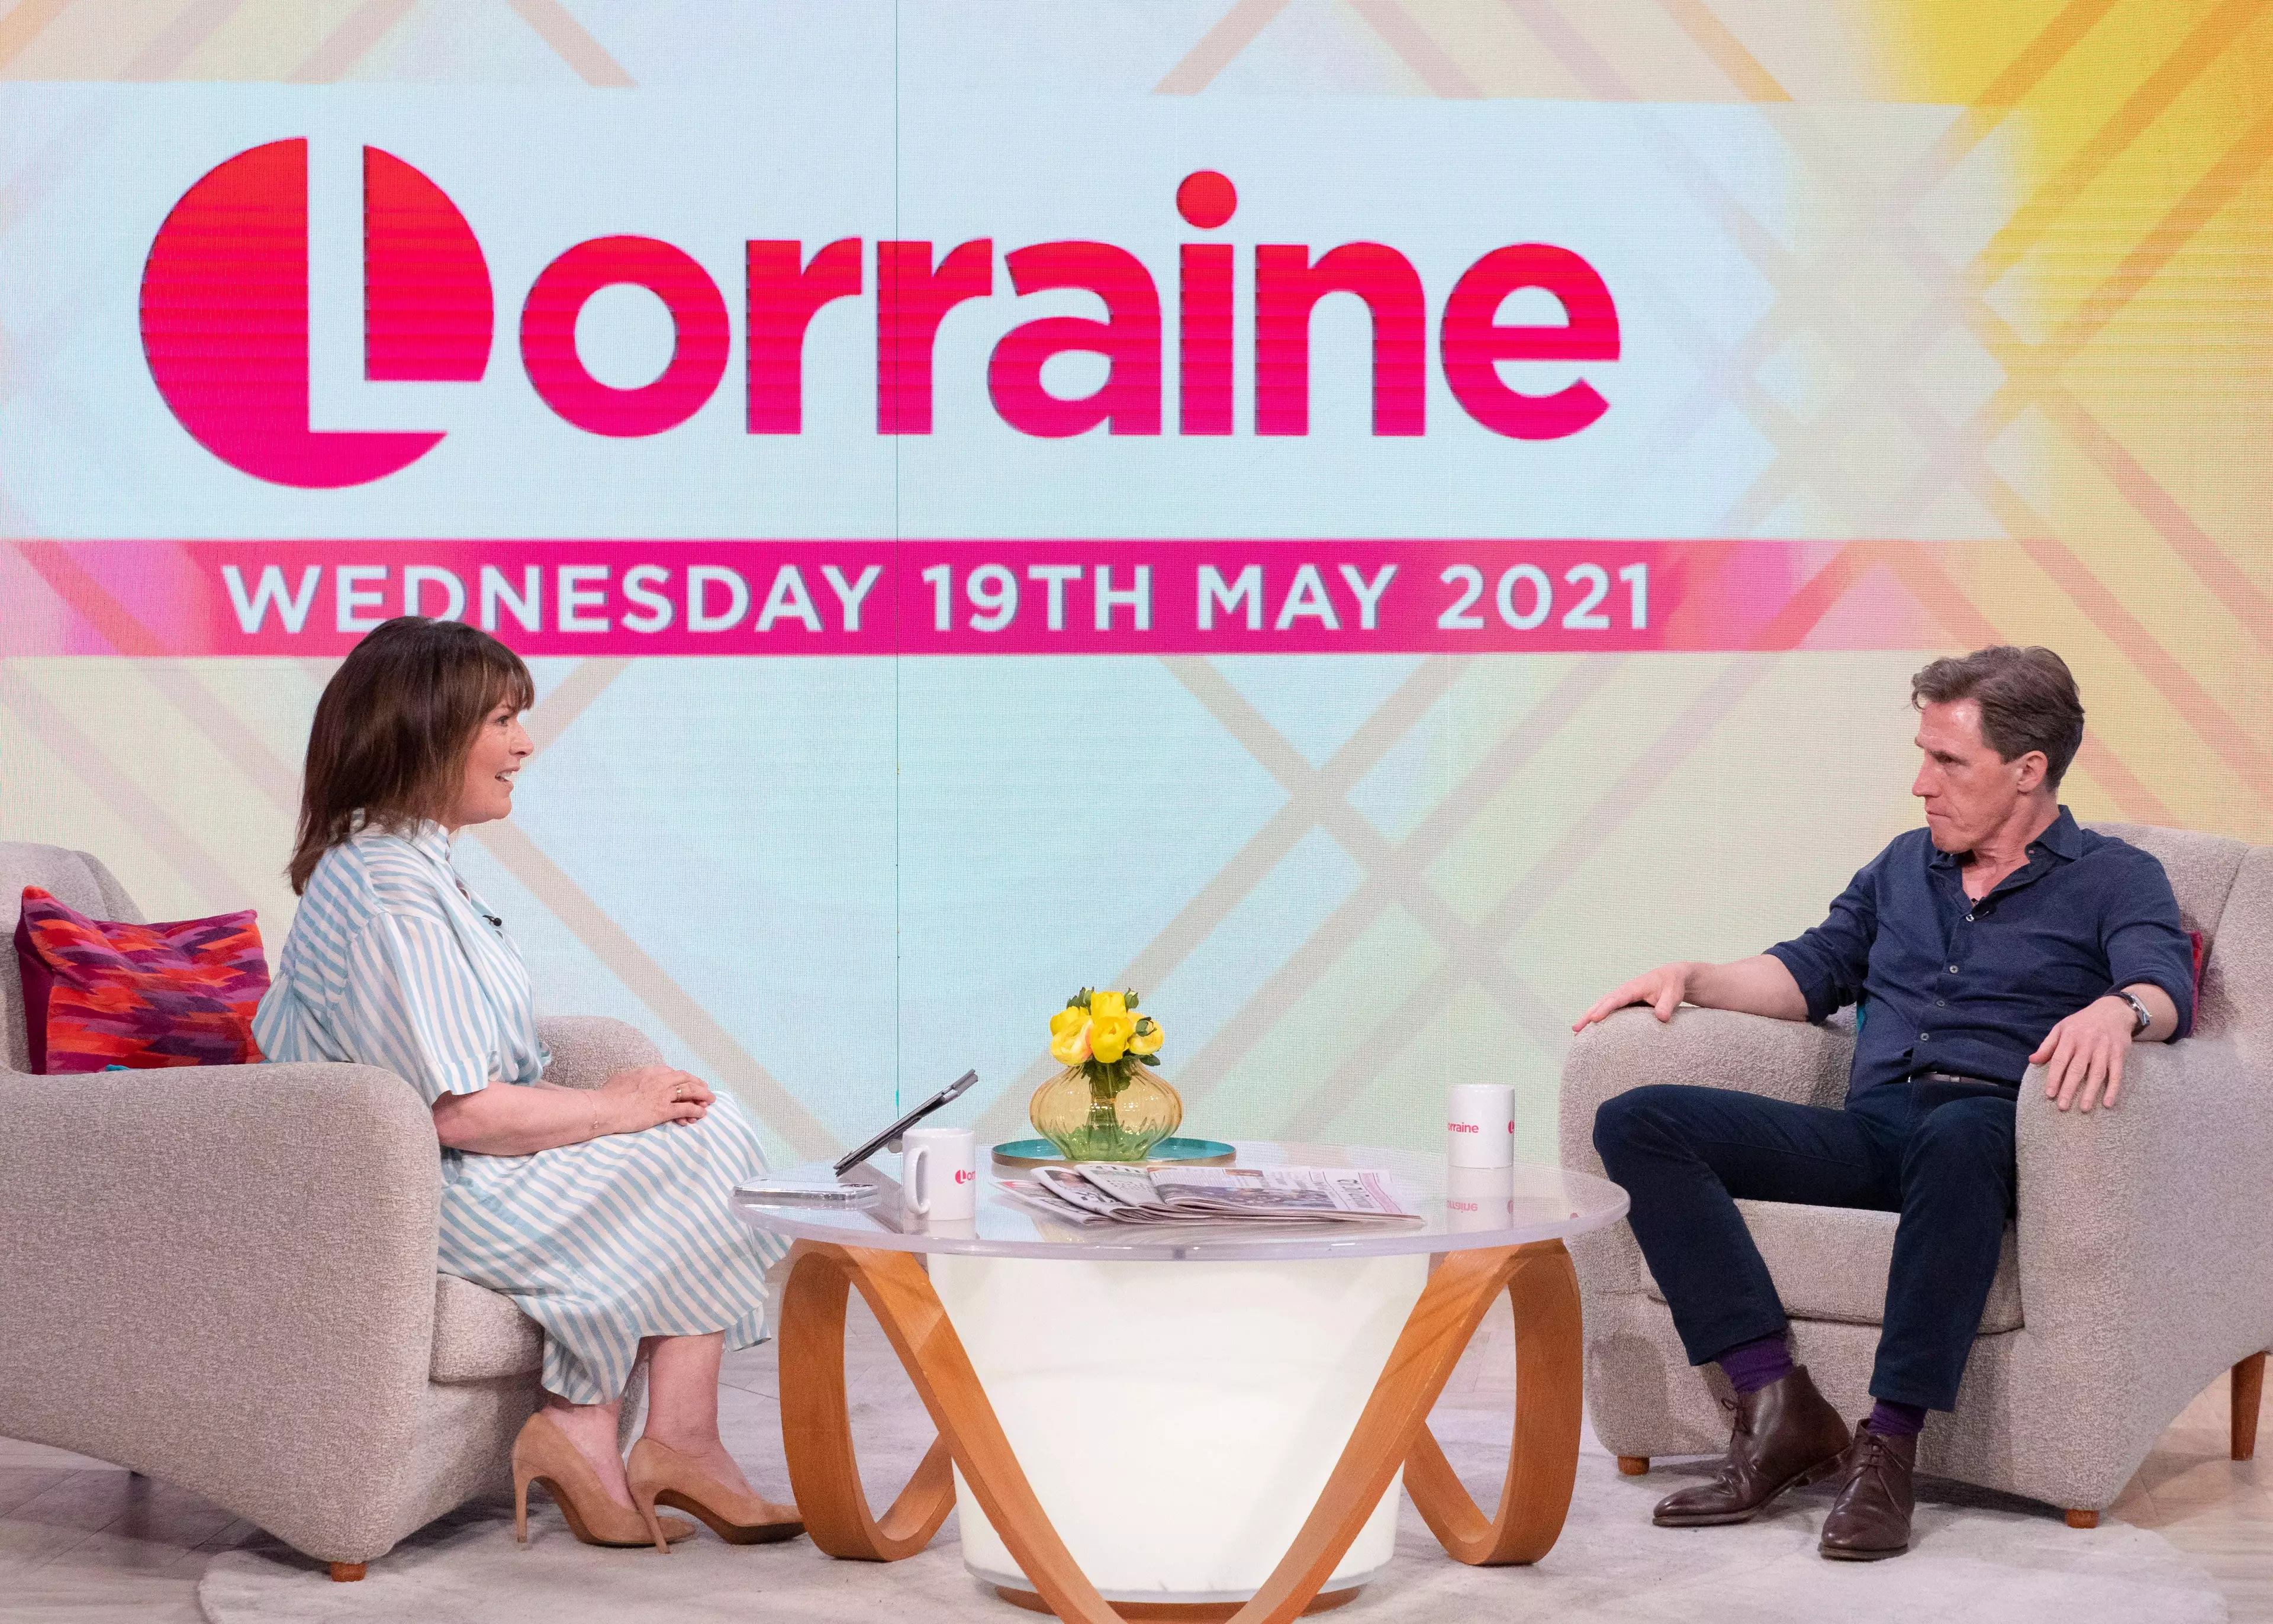 Rob Brydon appeared on Lorraine today (